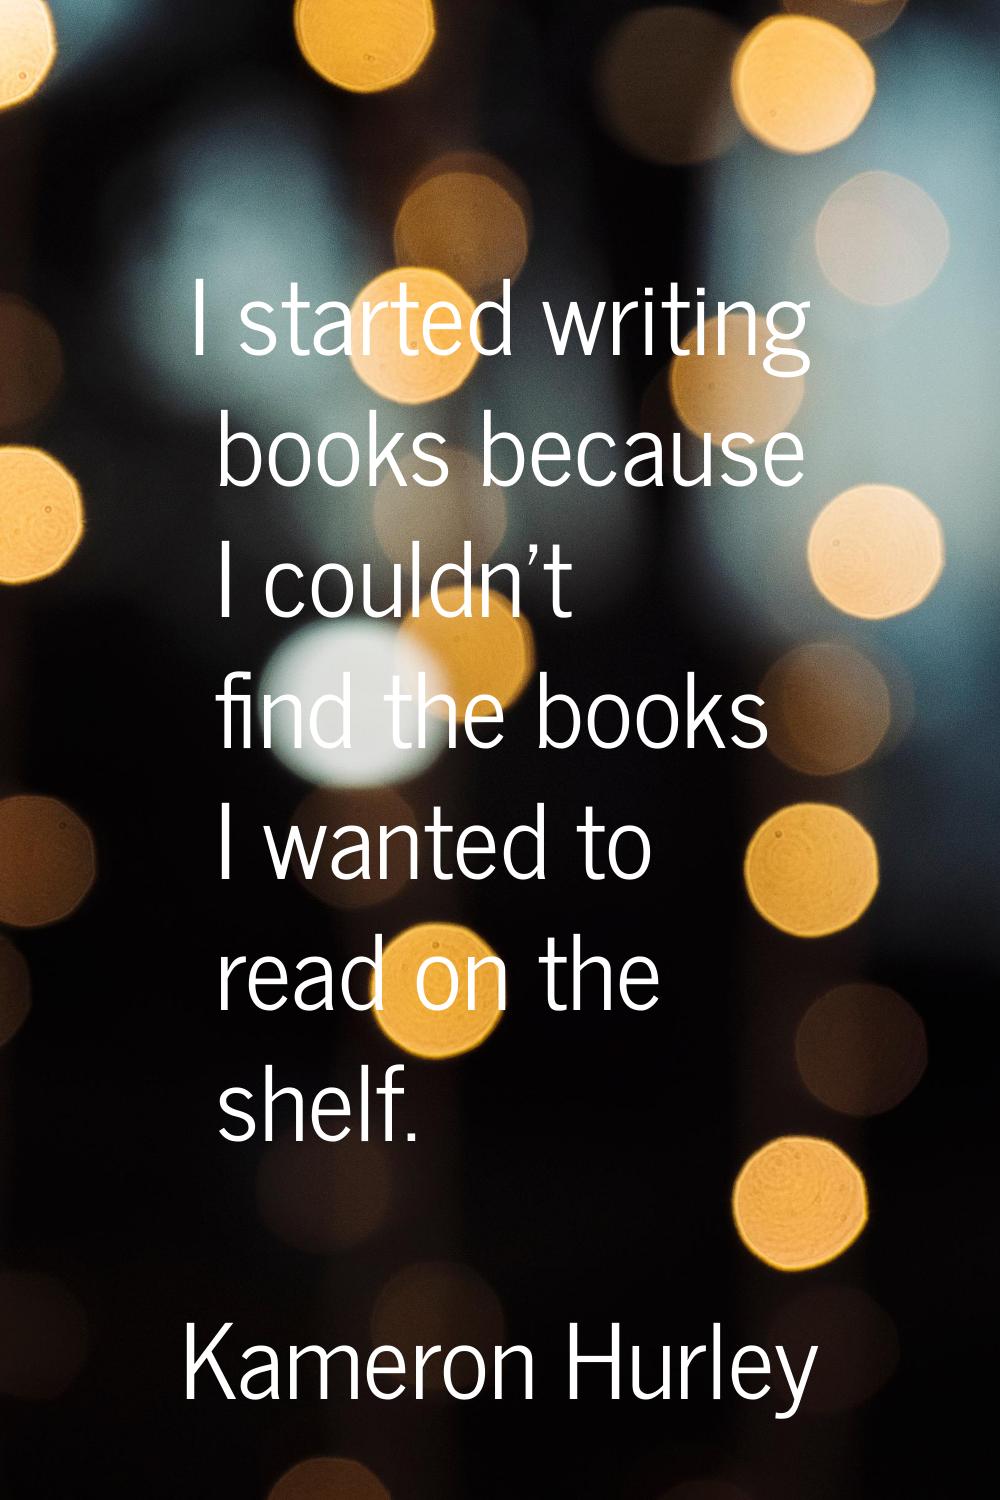 I started writing books because I couldn't find the books I wanted to read on the shelf.